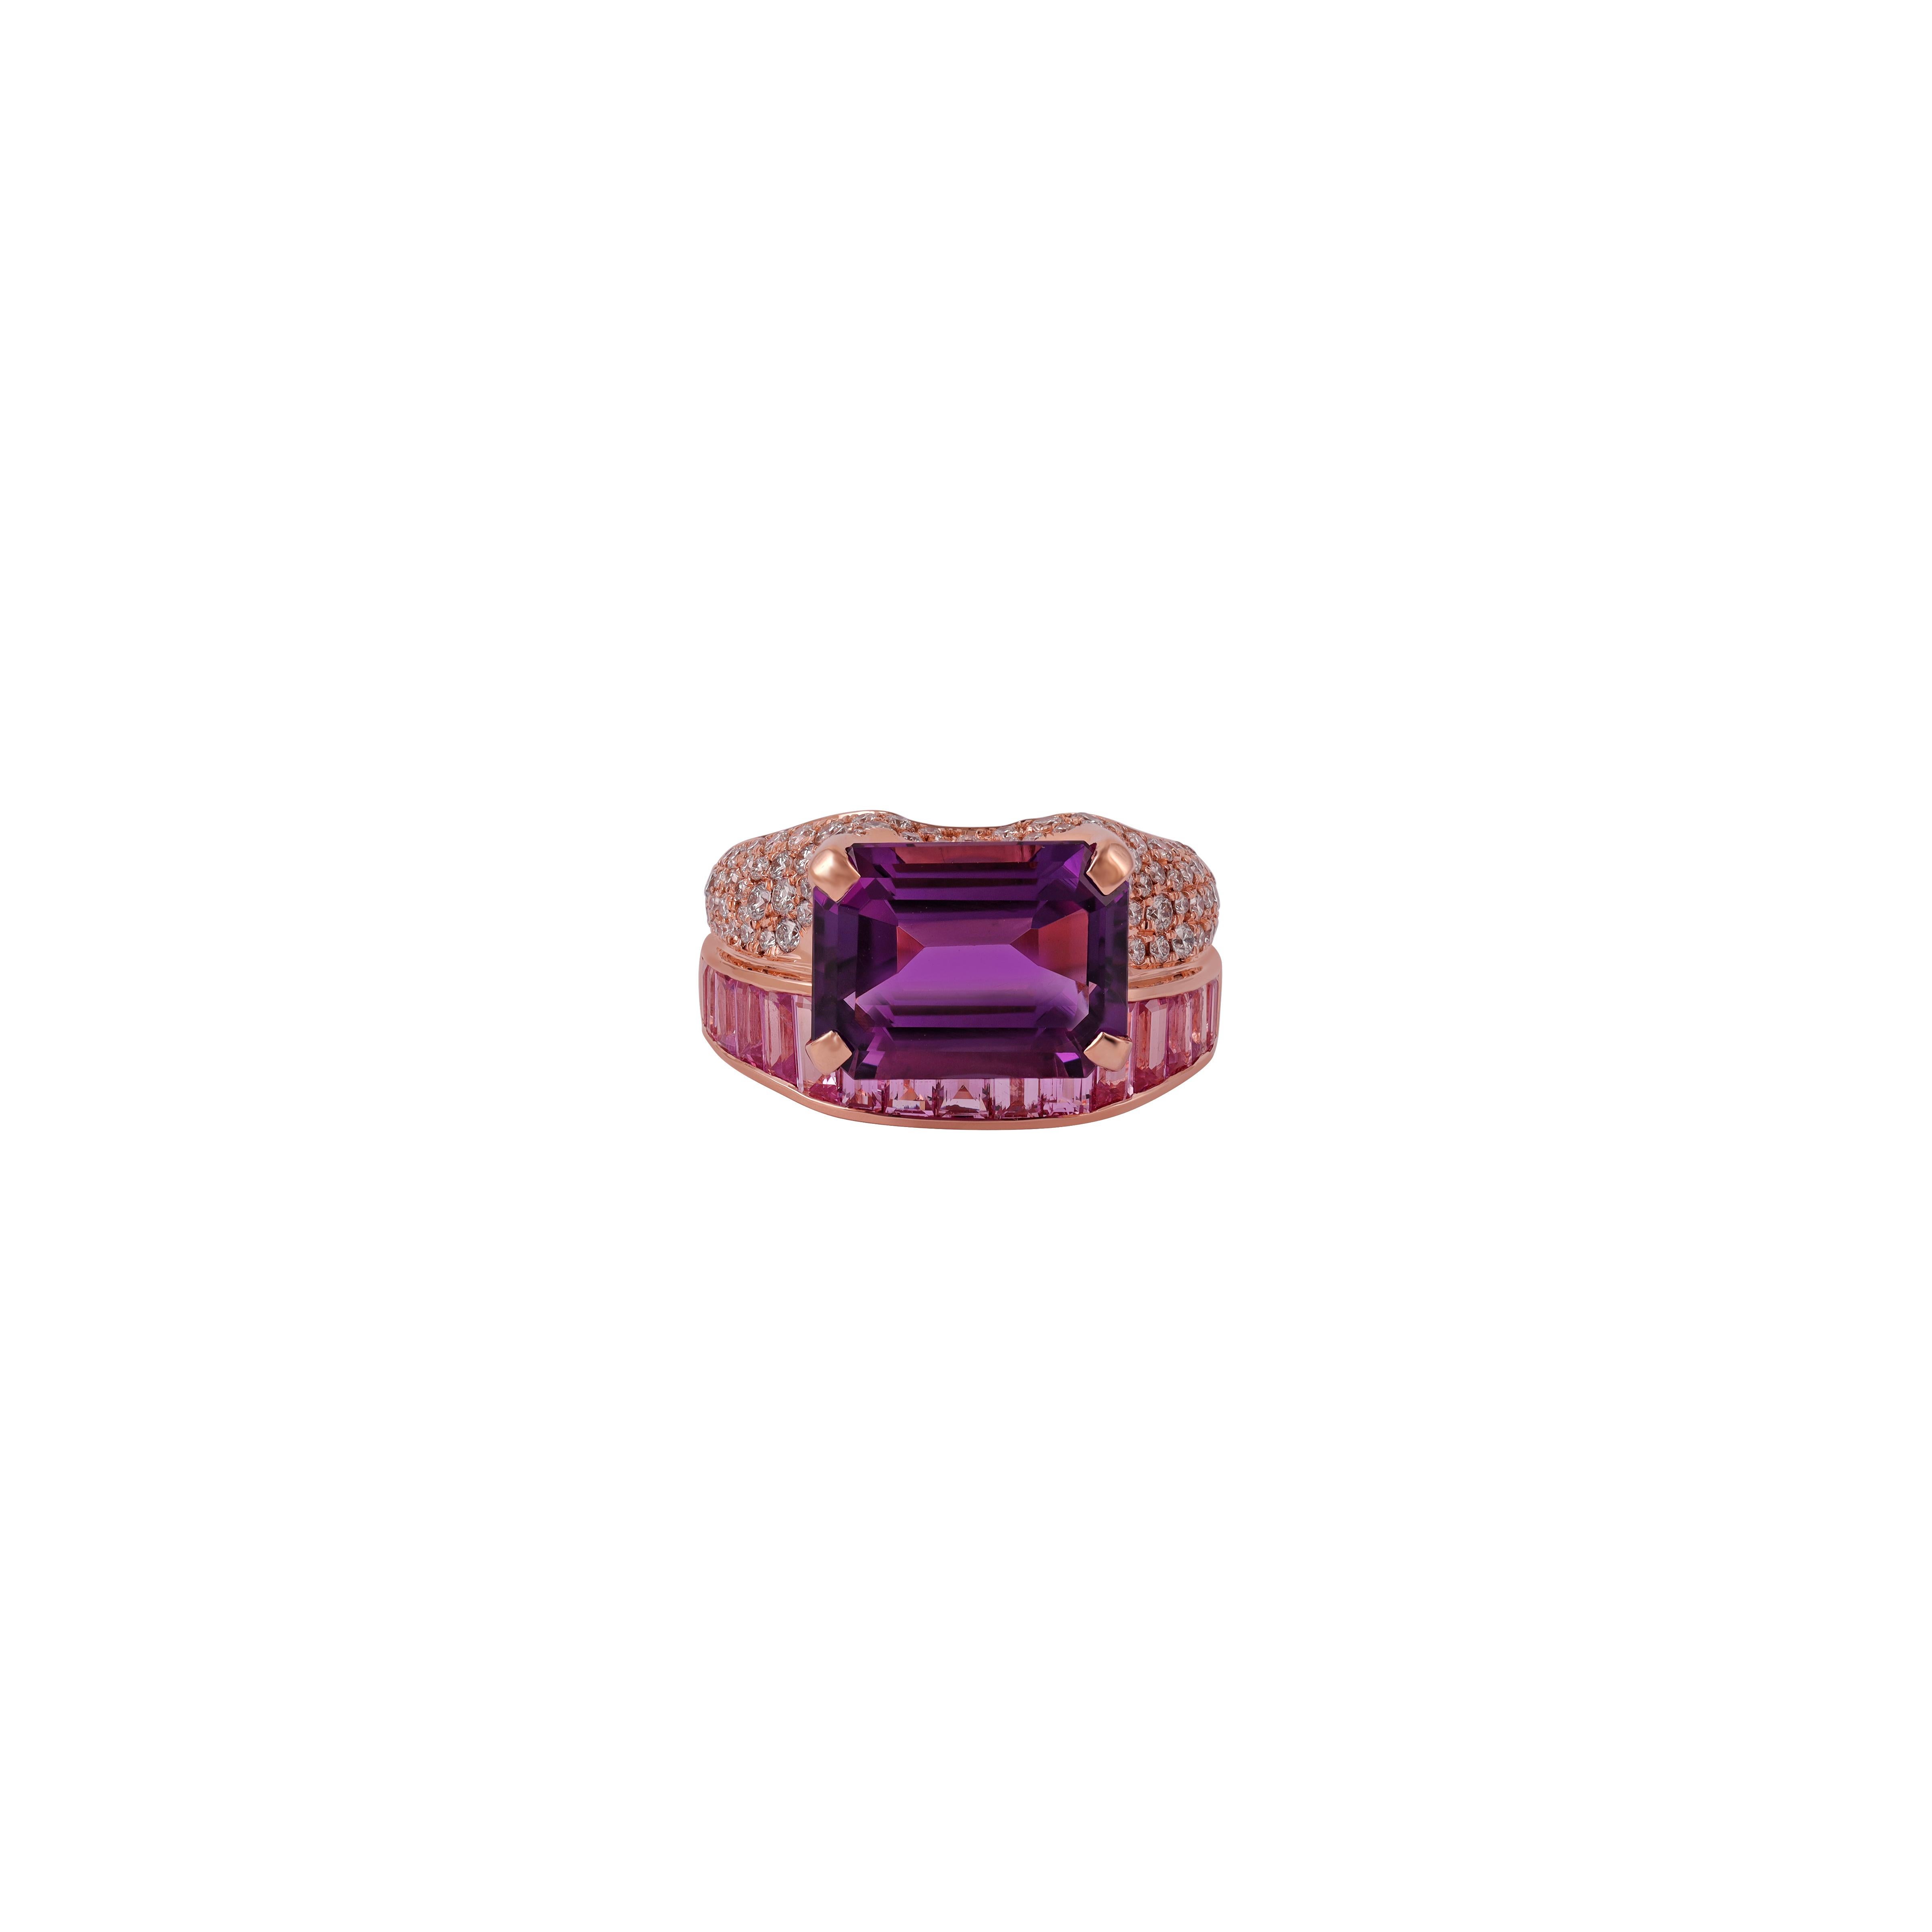 Product Details:

Metal - Rose Gold
Gemstone - Clear amethyst, Pink Sapphire, Diamond.
Amethyst Stone weight - 6.03 Carat
Diamond Stone weight - 0.79 Carat
Pink Sapphire Stone weight - 2.31 Carat
Gold Weight - 11.5 Gm.

Elegant designer ring made in